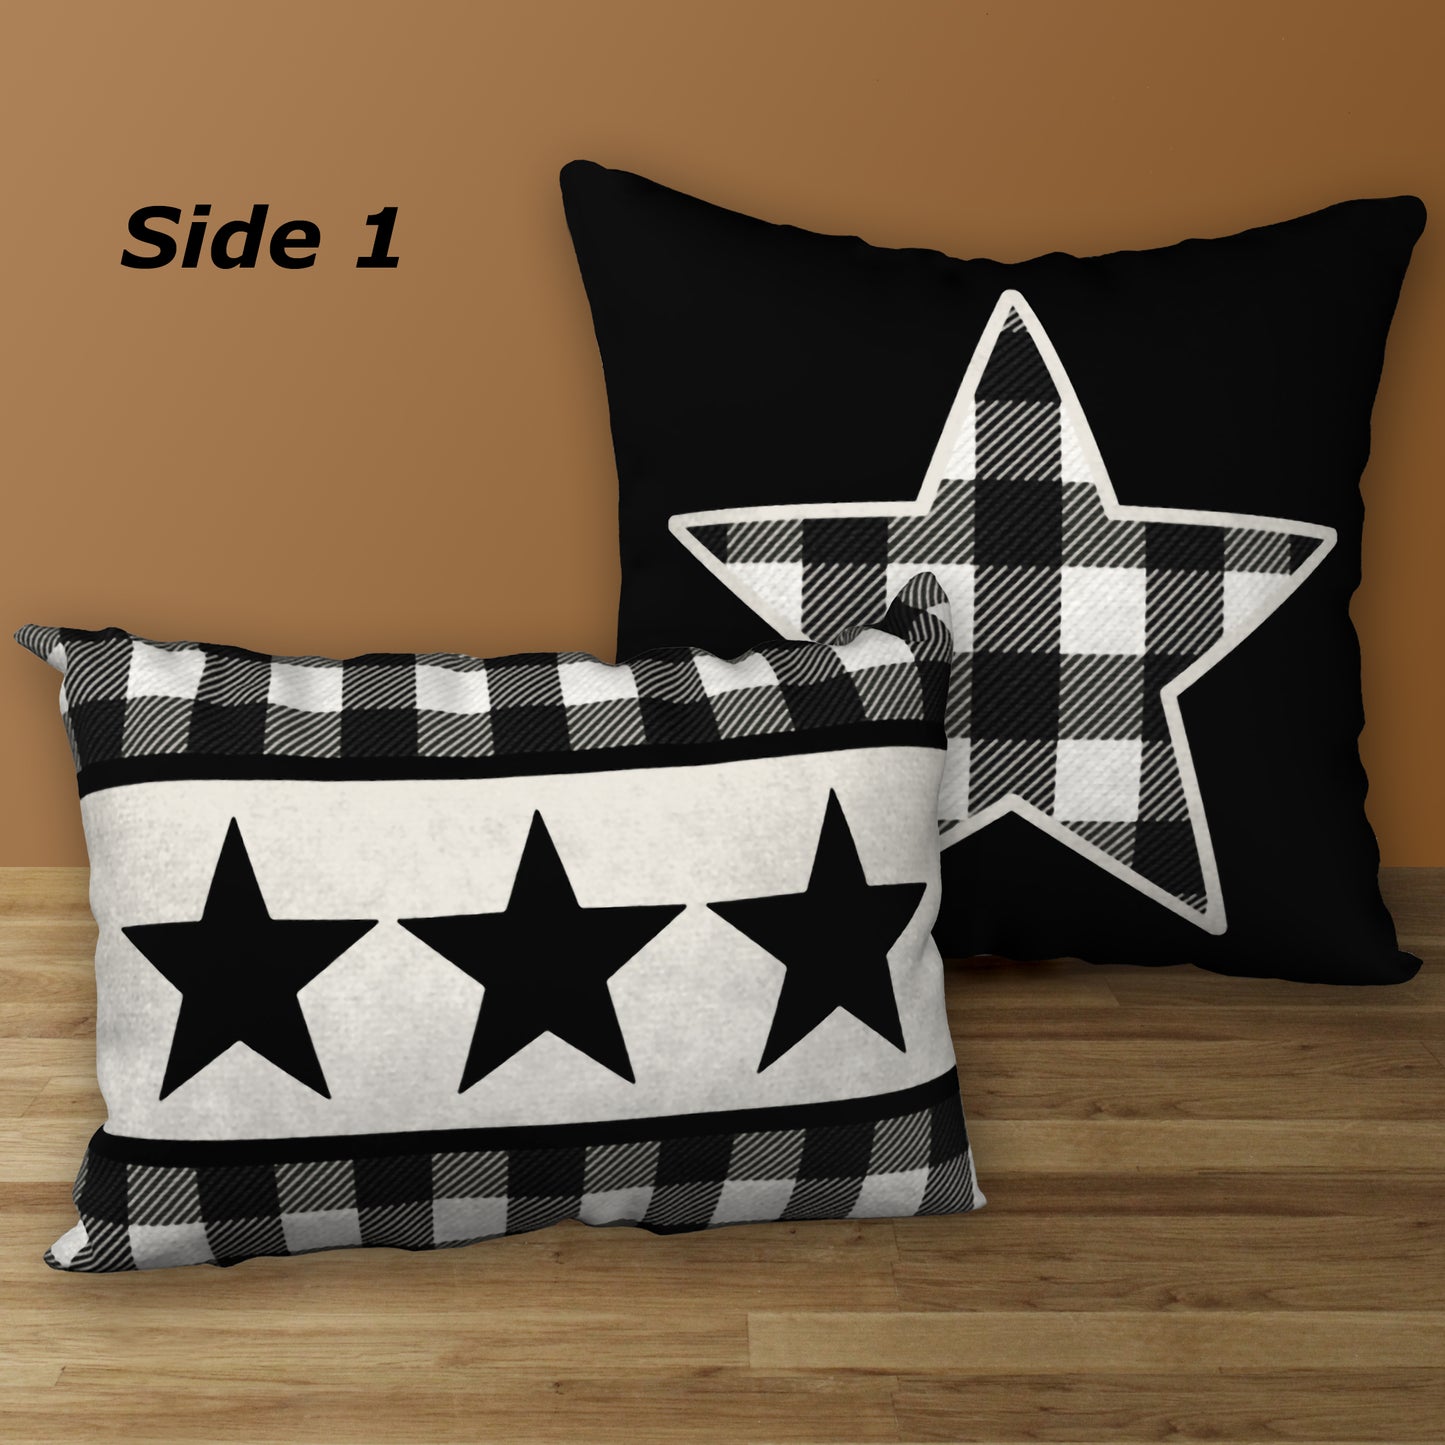 Set of 2 Black & White Buffalo Plaid with Stars Designer Pillows, 20"x14" and 18"x18"